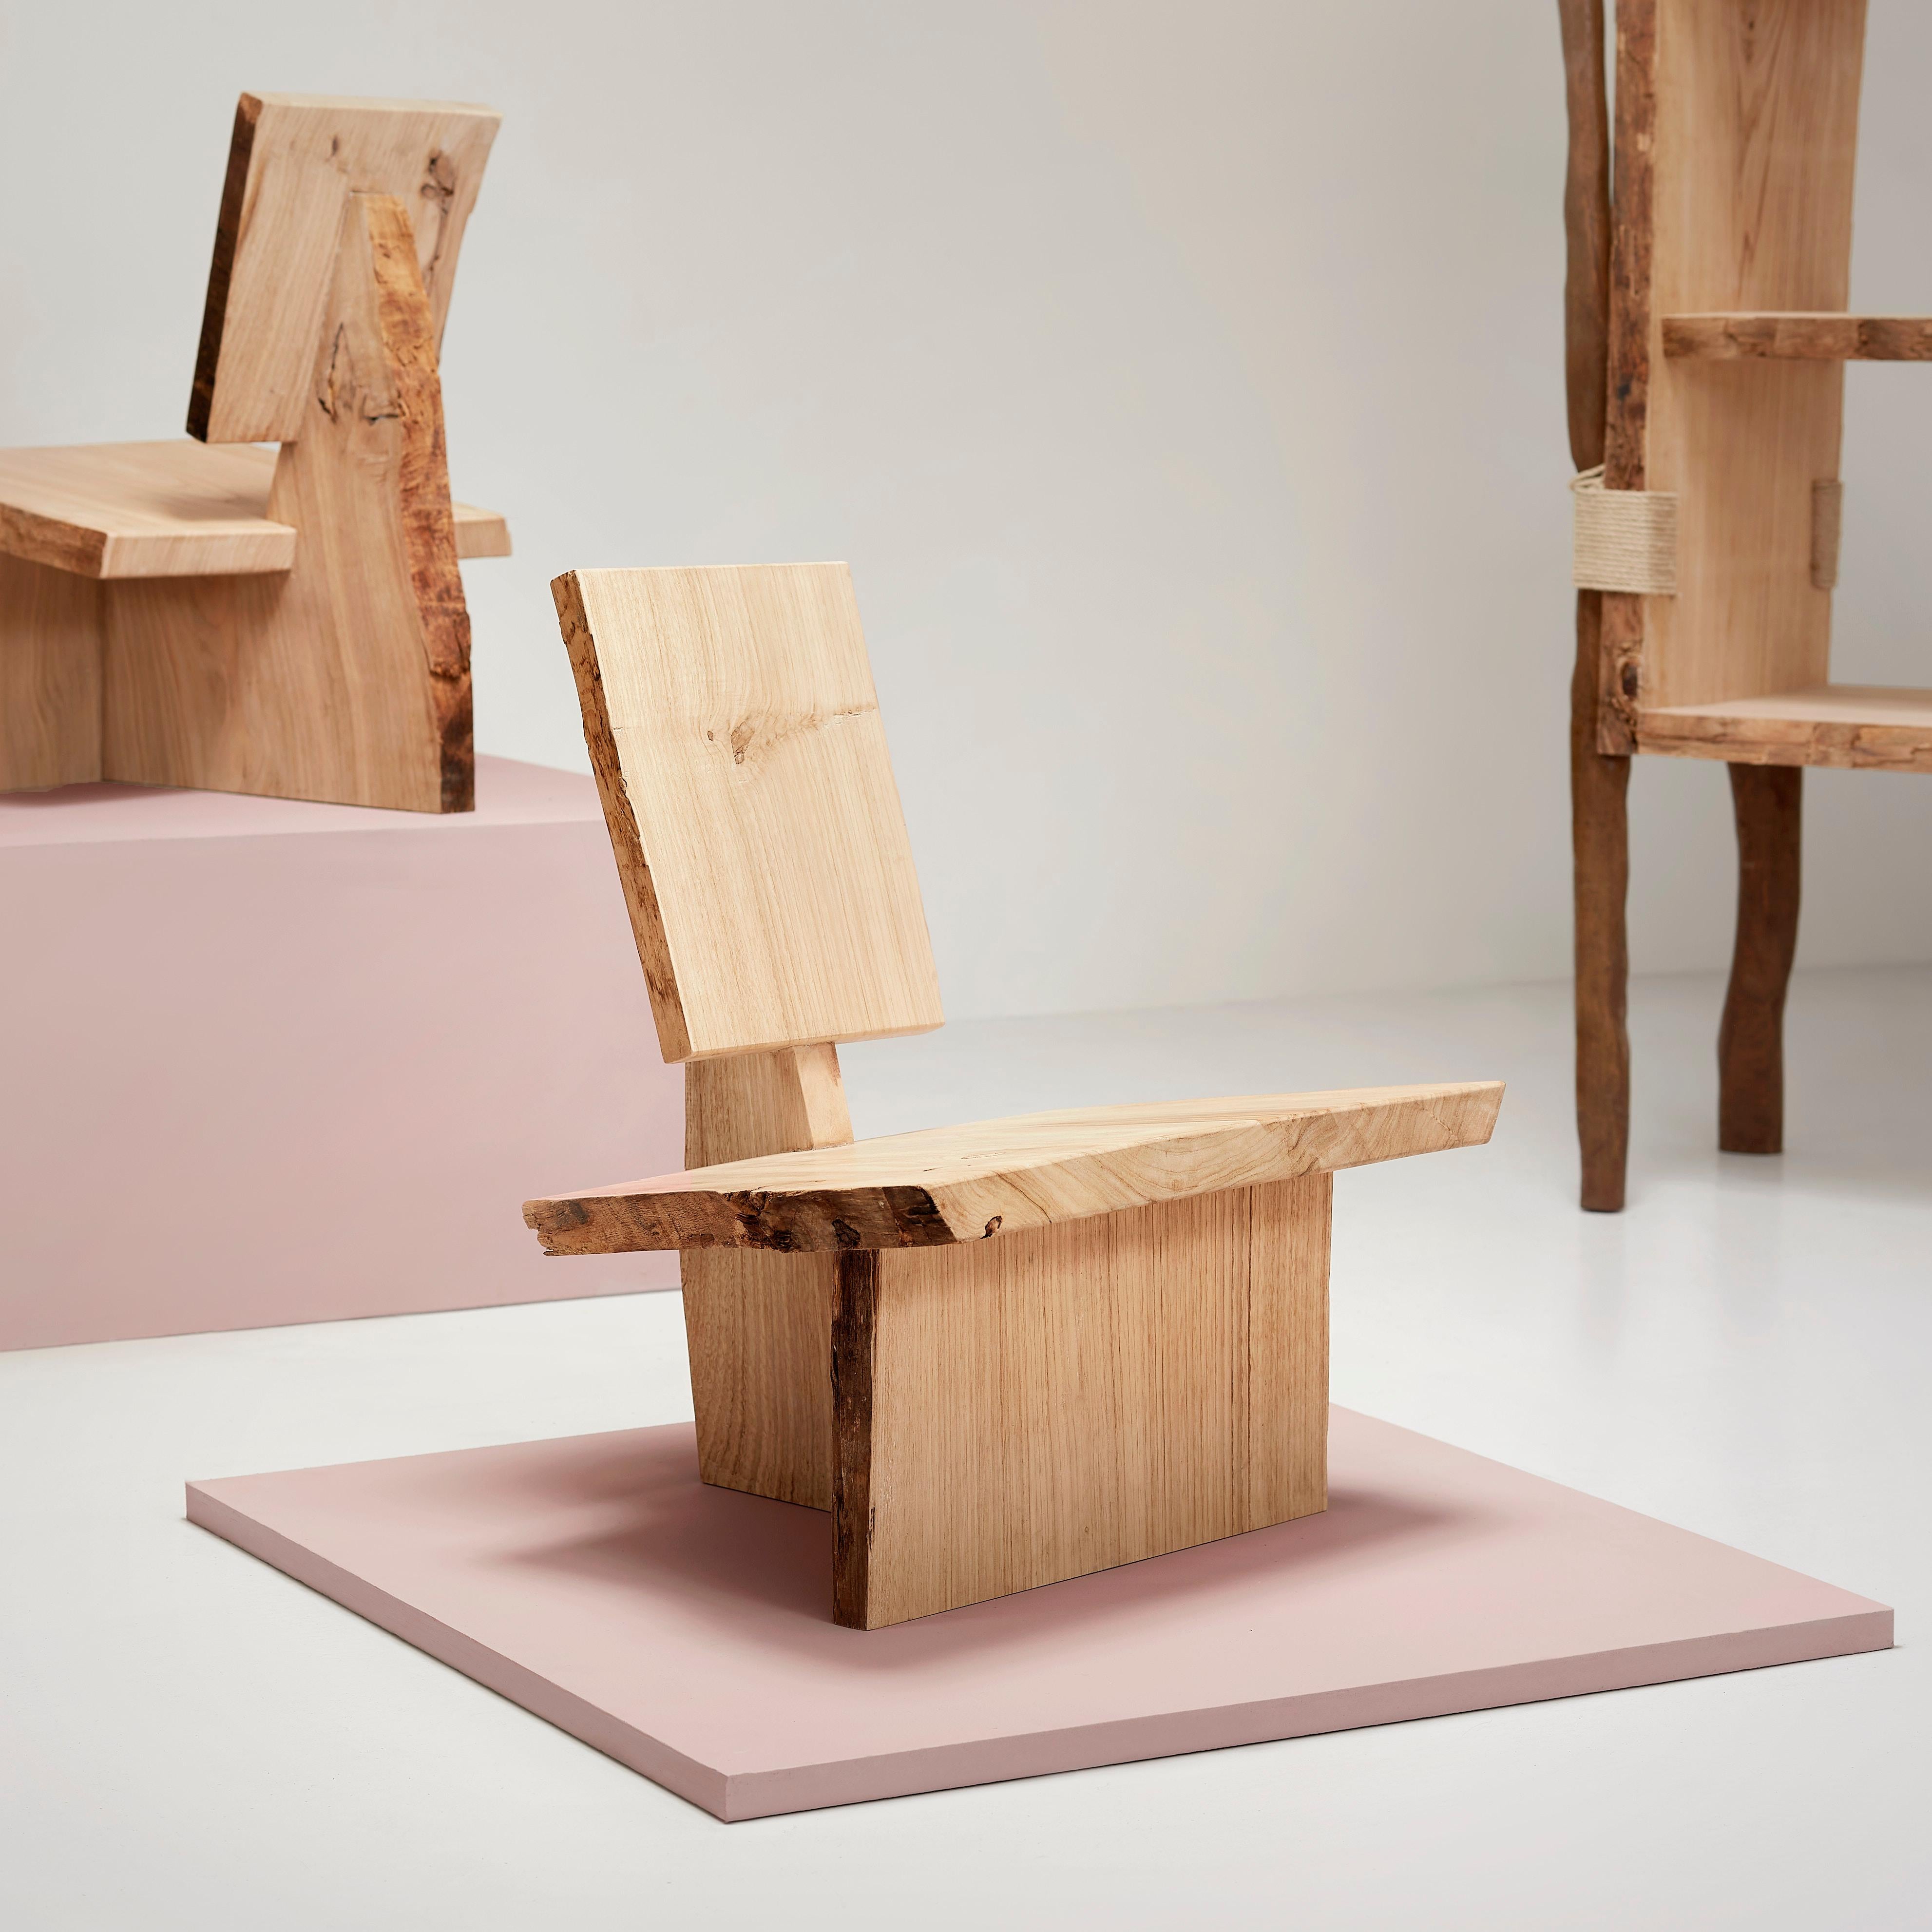 Ripped Wood Lounge Chair by Willem Van Hooff
Handmade
Dimensions: W 50 to 56 x H 70 to 80 cm (Dimensions may vary as pieces are hand-made and might present slight variations in sizes)
Materials: Wood


Willem van Hooff is a designer based in